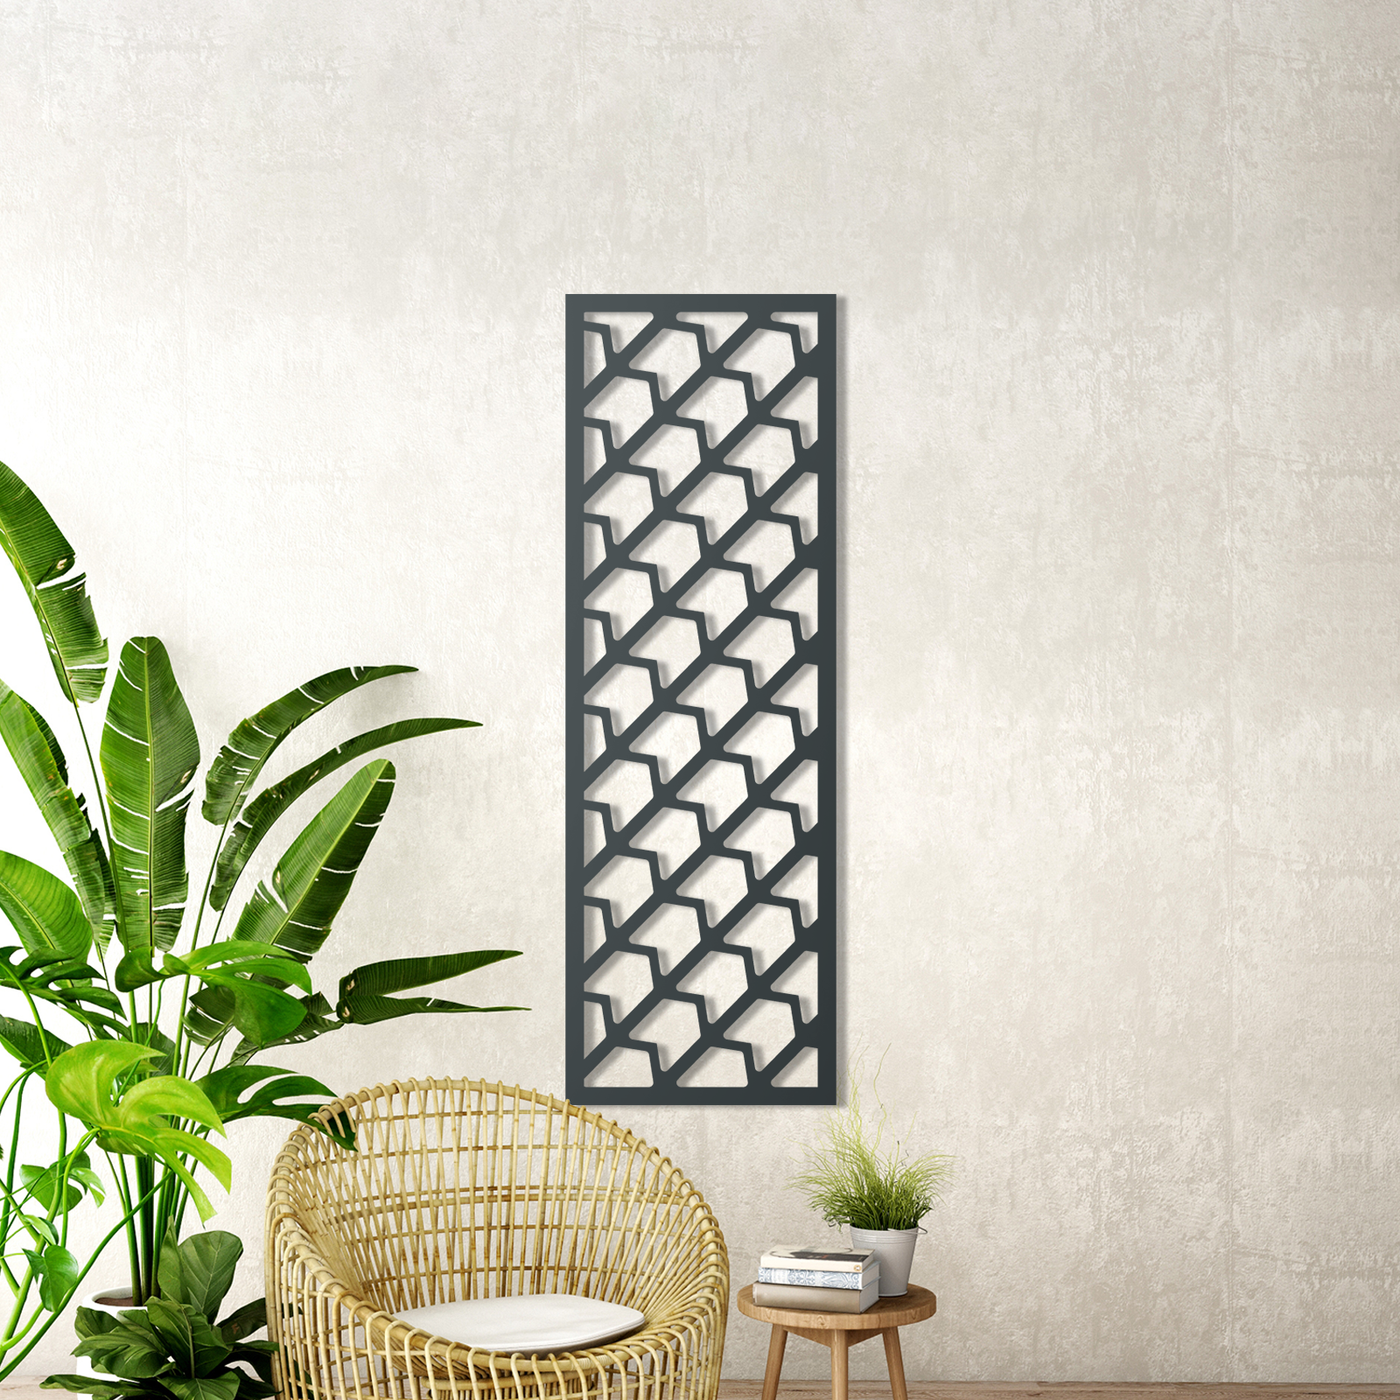 The Right Direction Garden Screen: The Perfect Combination of Style and Functionality